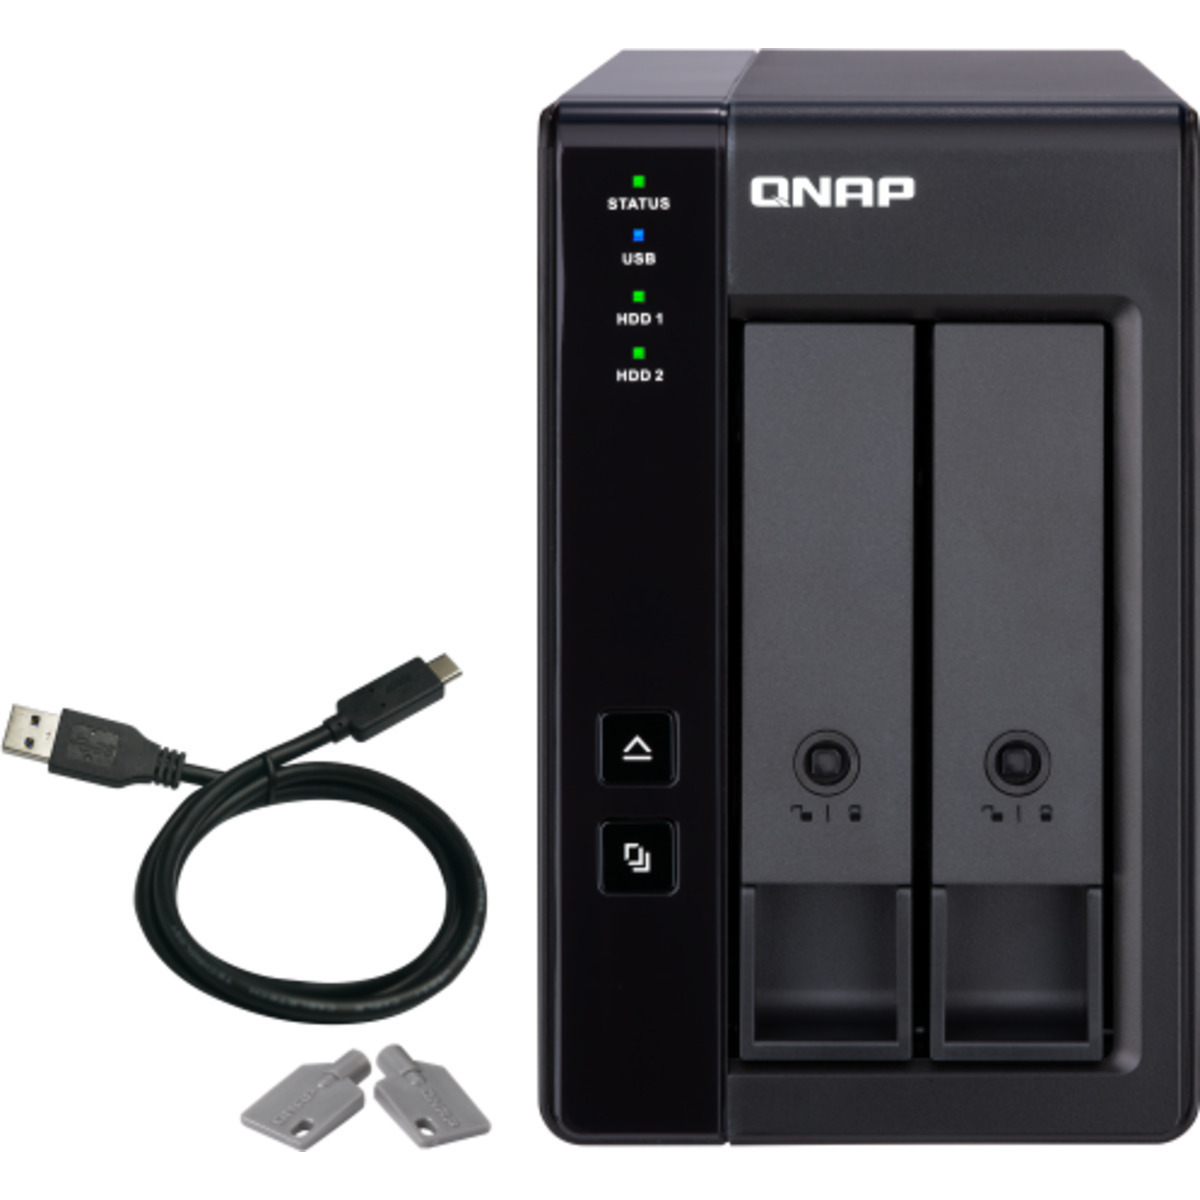 buy QNAP TR-002 External Expansion Drive 24tb Desktop Expansion Enclosure 2x12000gb Seagate IronWolf Pro ST12000NT001 3.5 7200rpm SATA 6Gb/s HDD NAS Class Drives Installed - Burn-In Tested - ON SALE - nas headquarters buy network attached storage server device das new raid-5 free shipping usa spring sale TR-002 External Expansion Drive